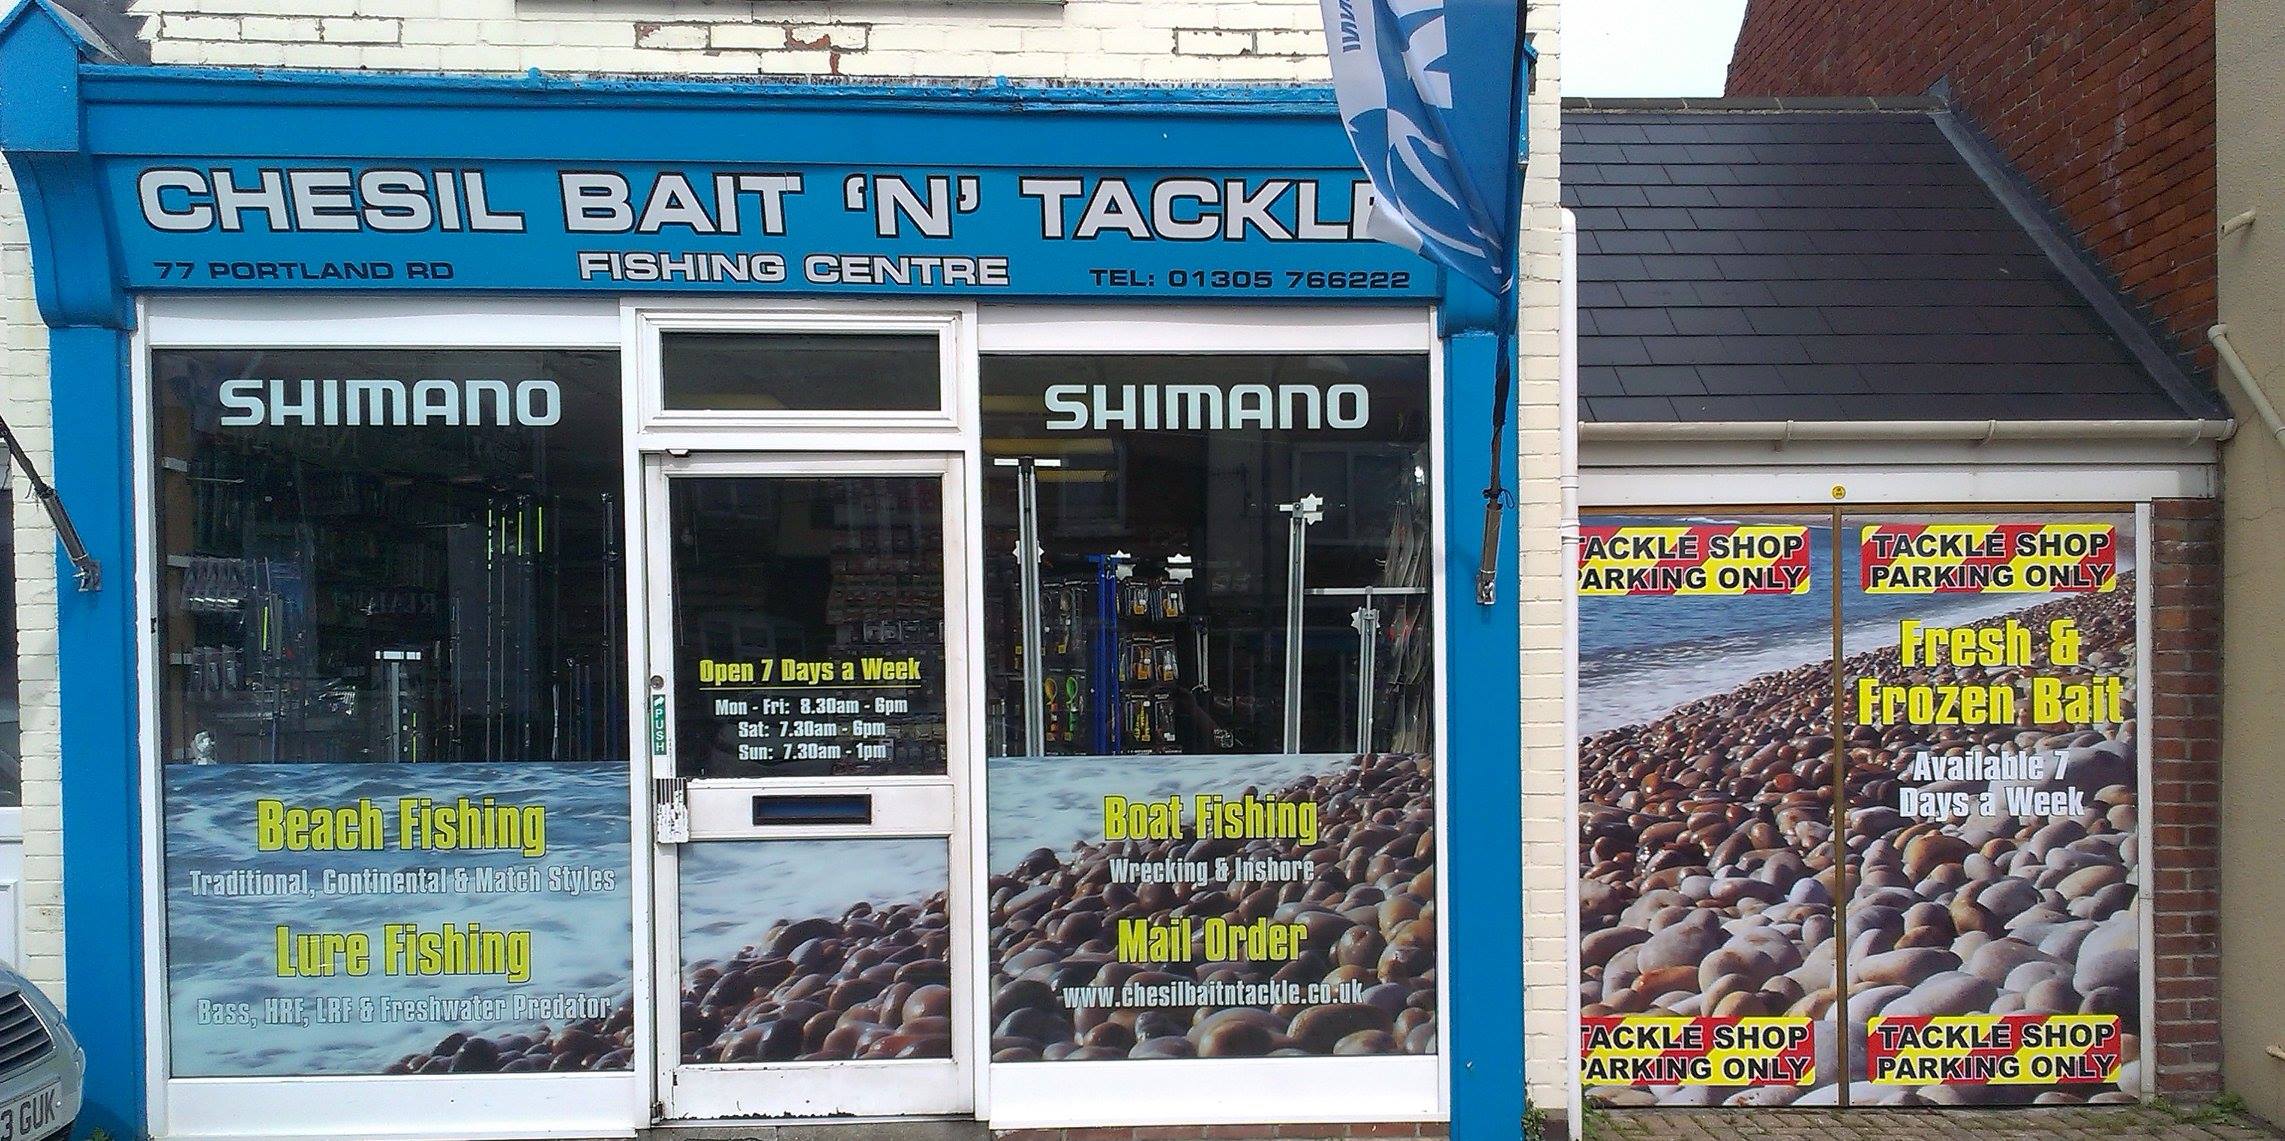 Chesil Bait n Tackle